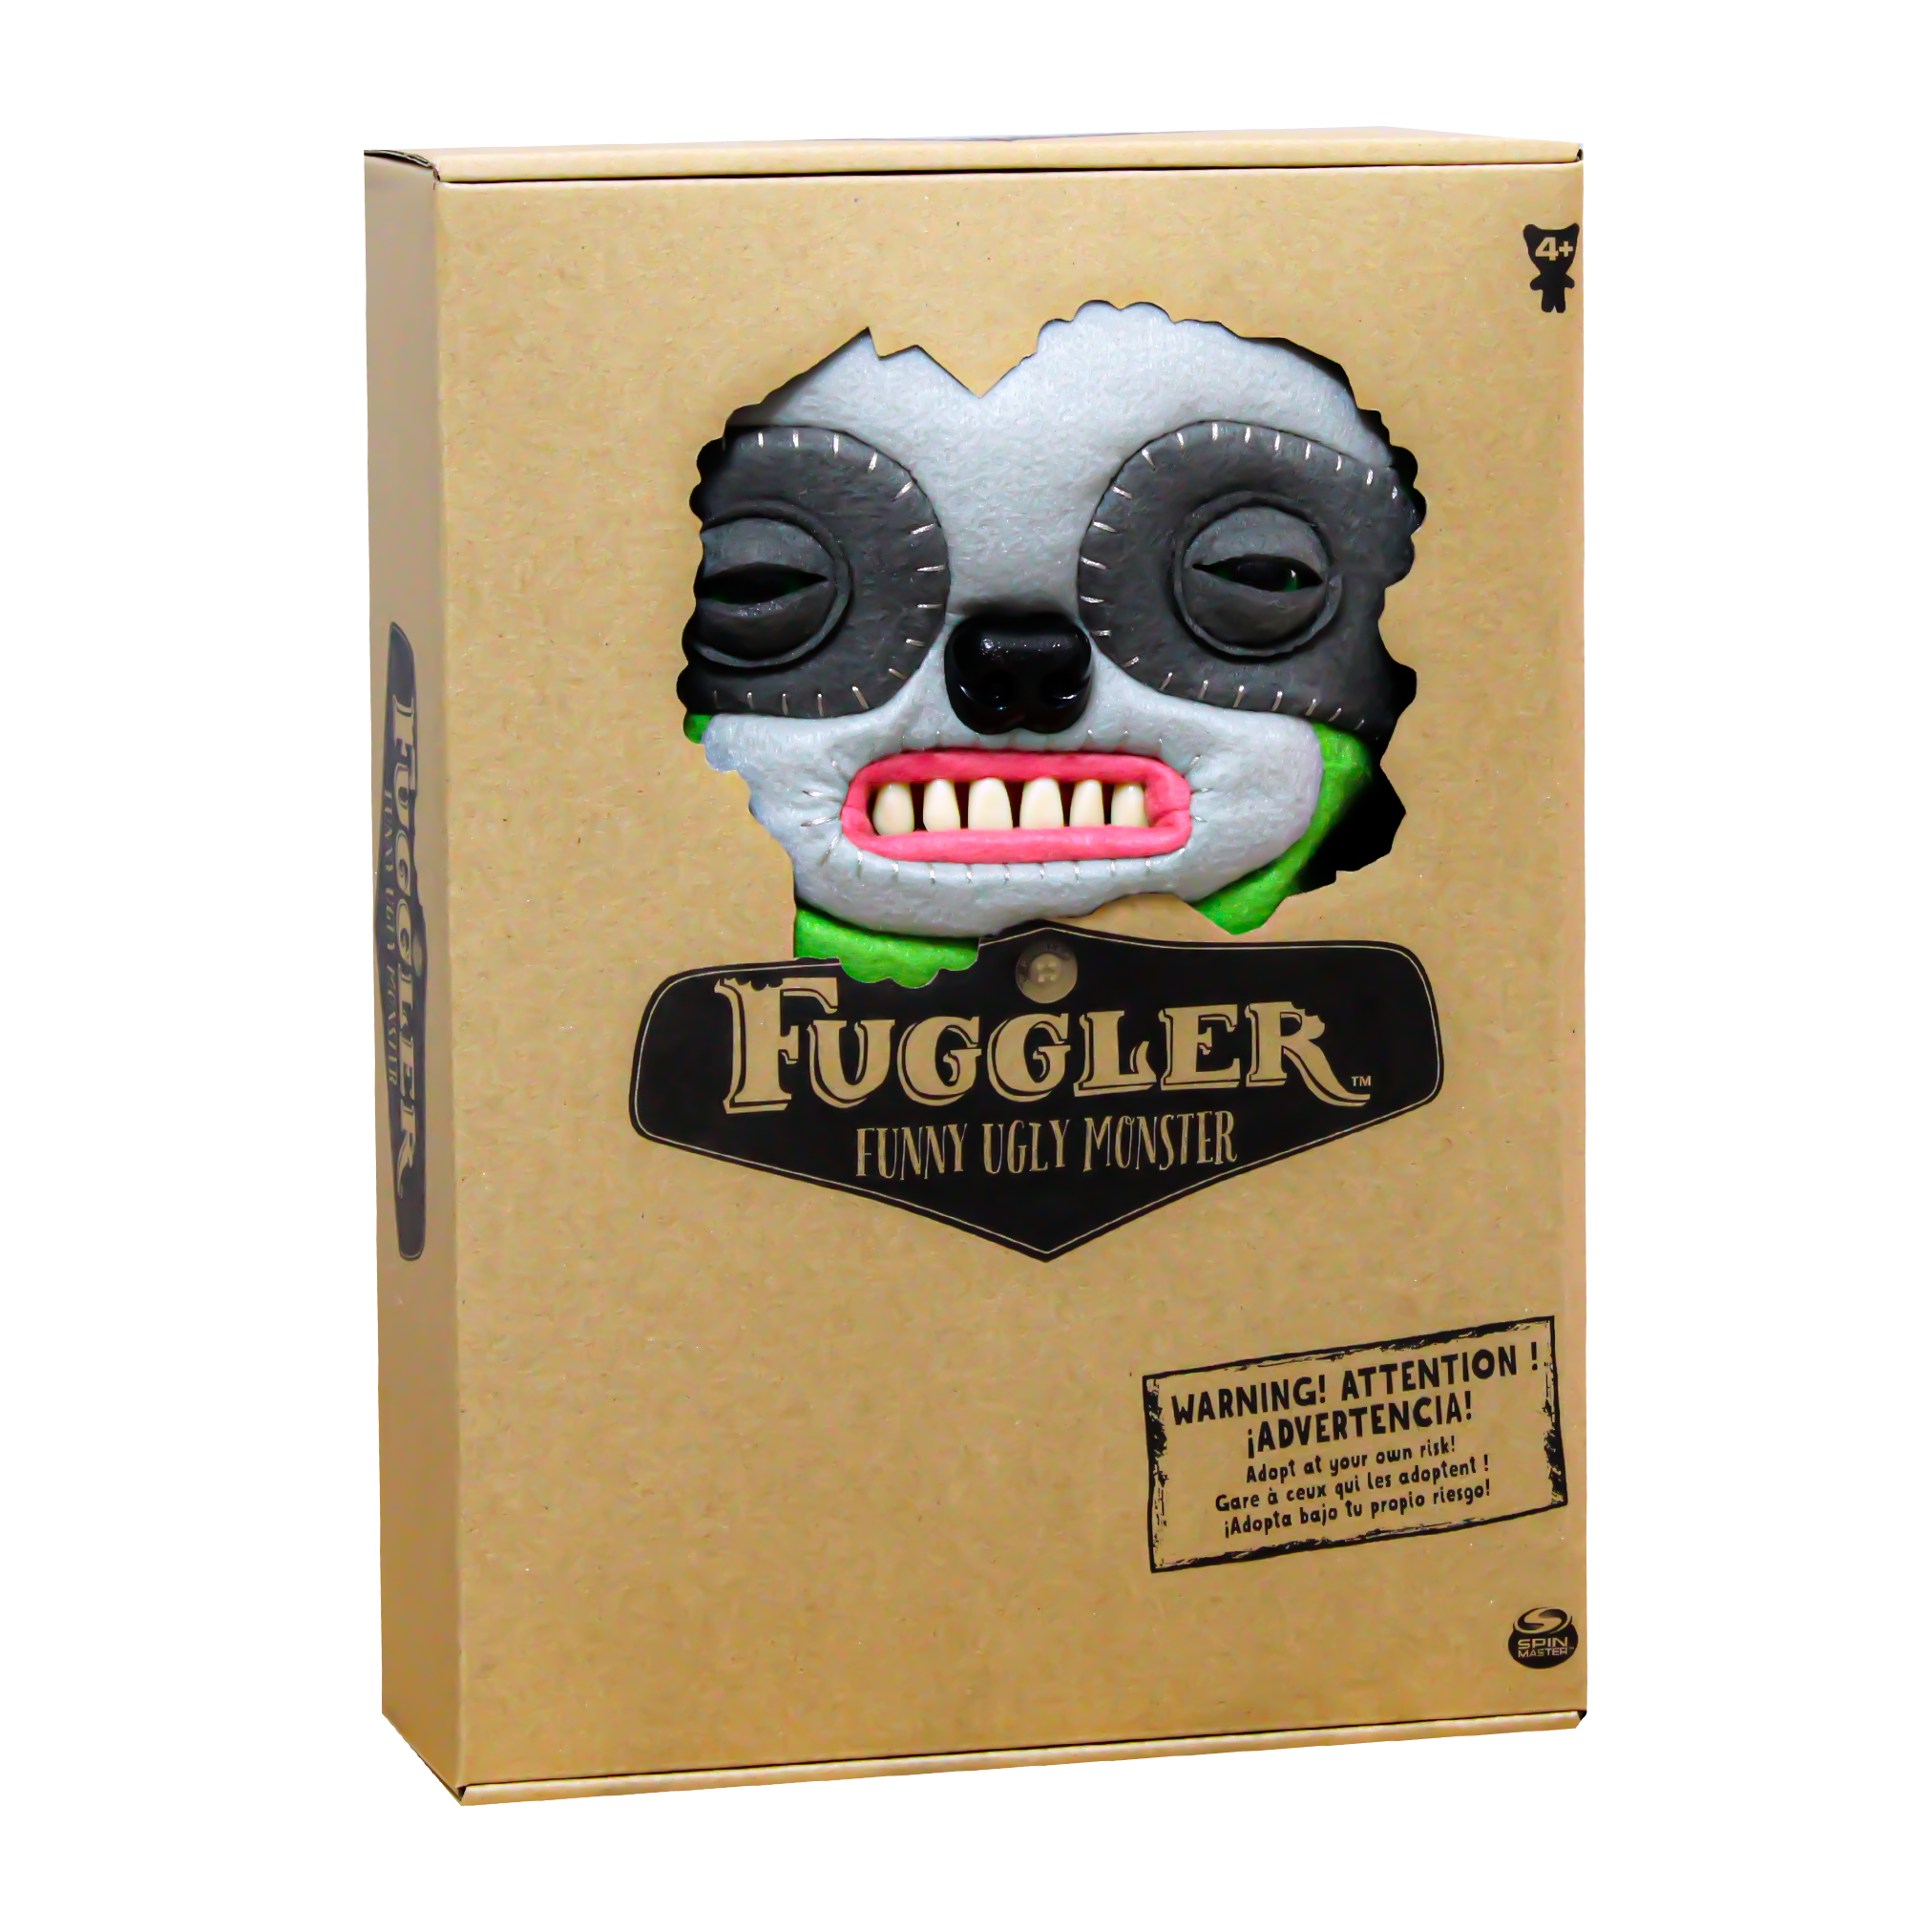 Fugglers Funny Ugly Monster Plush Toy for Boys - Green